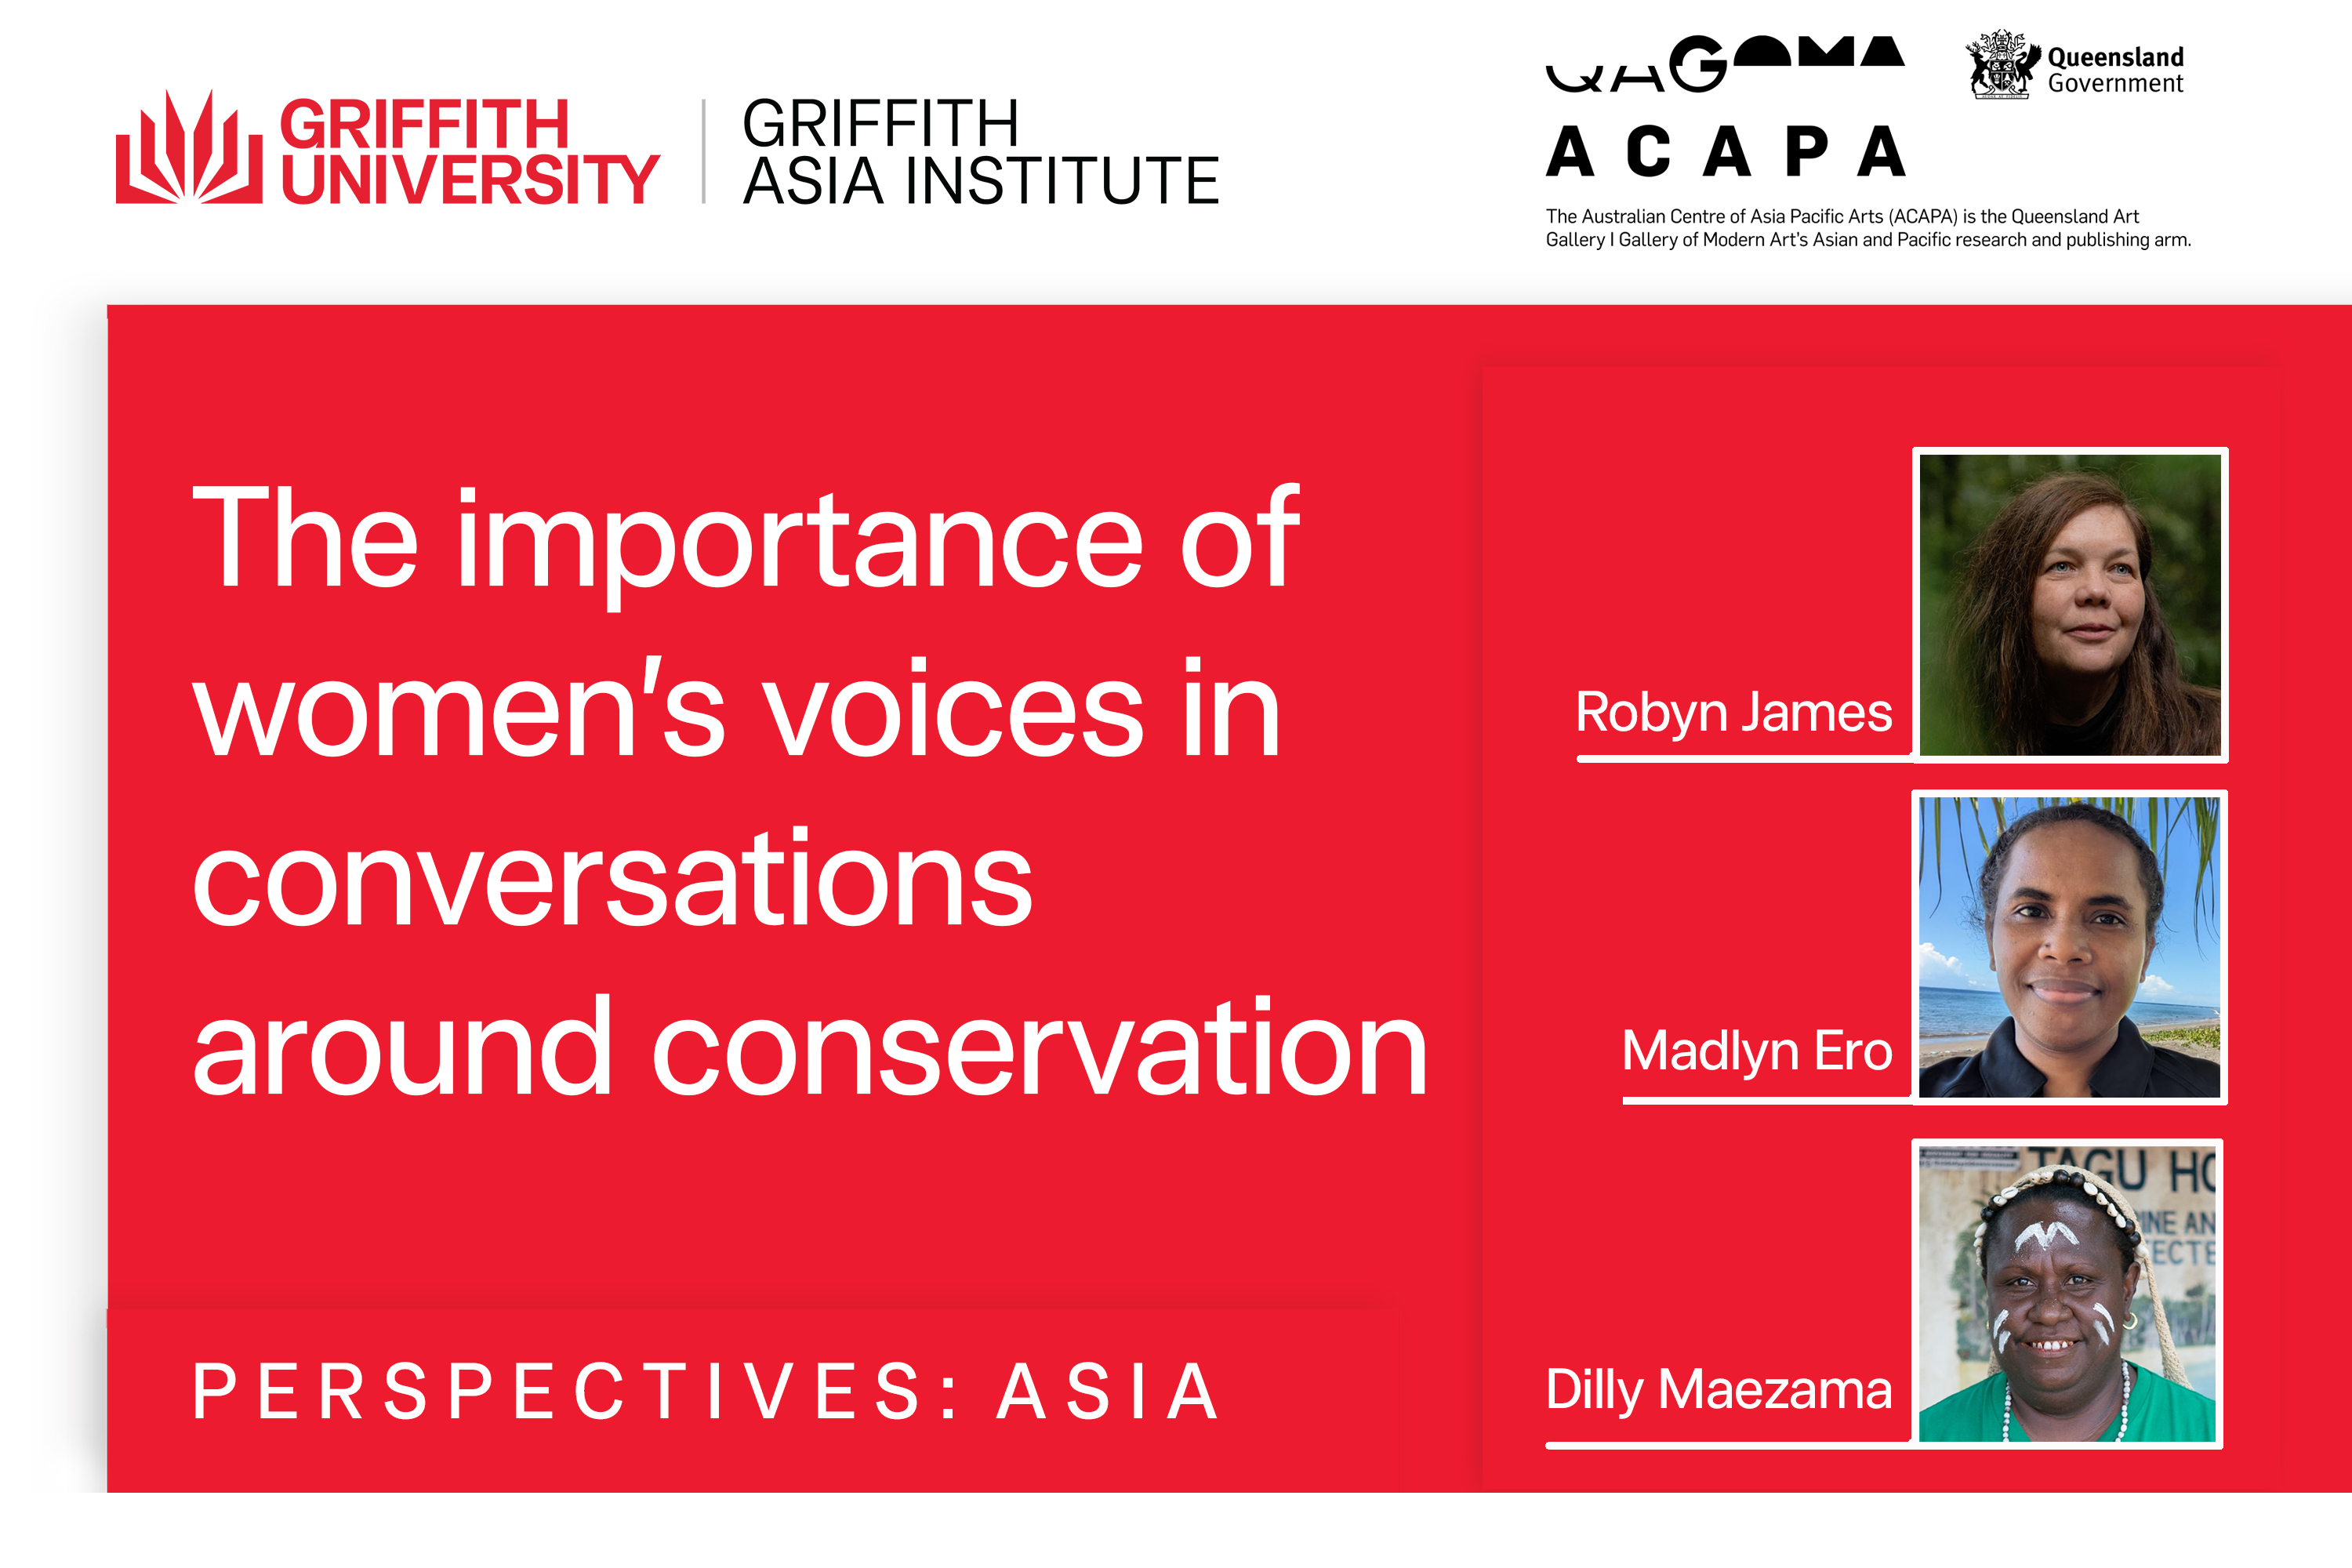 Perspectives ASIA | The importance of women's voices in conversations around conservation